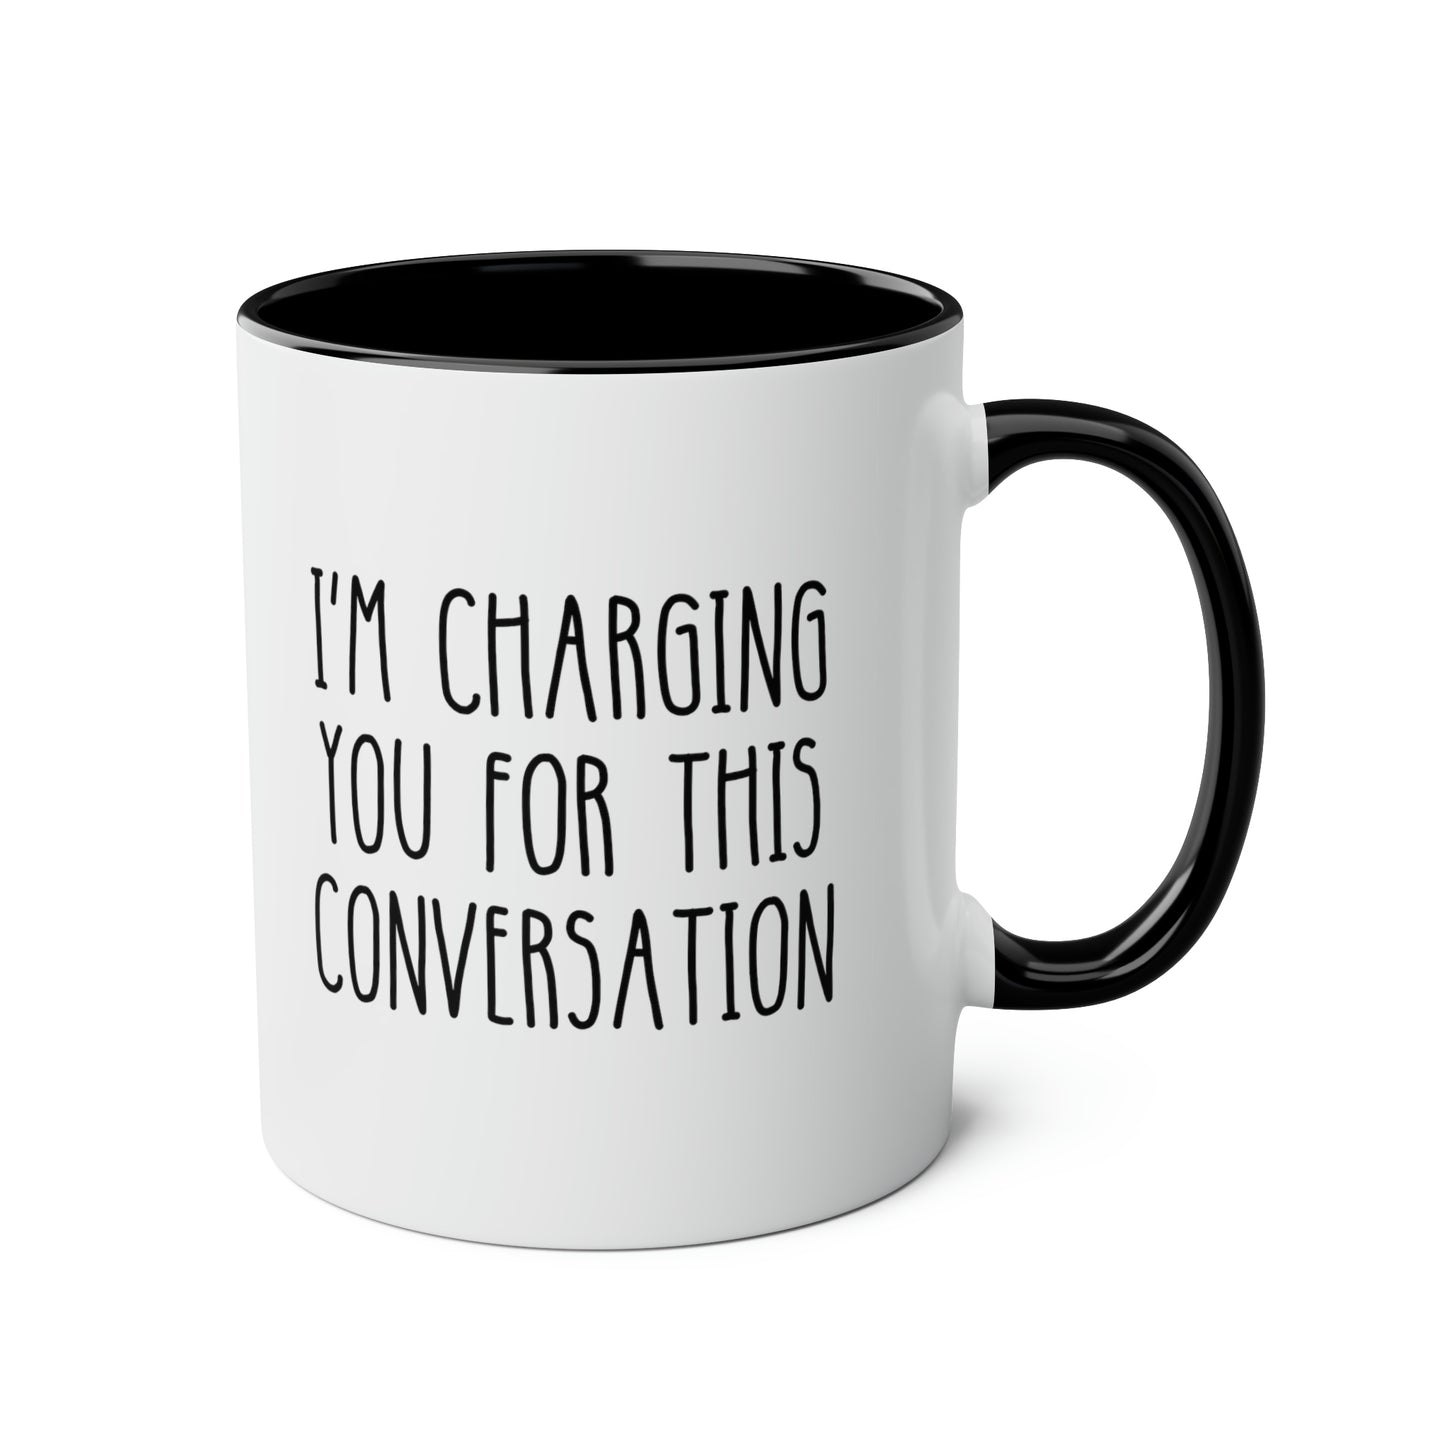 Im Charging You For This Conversation 11oz white with black accent funny large coffee mug gift for lawyer attorney student law judge waveywares wavey wares wavywares wavy wares